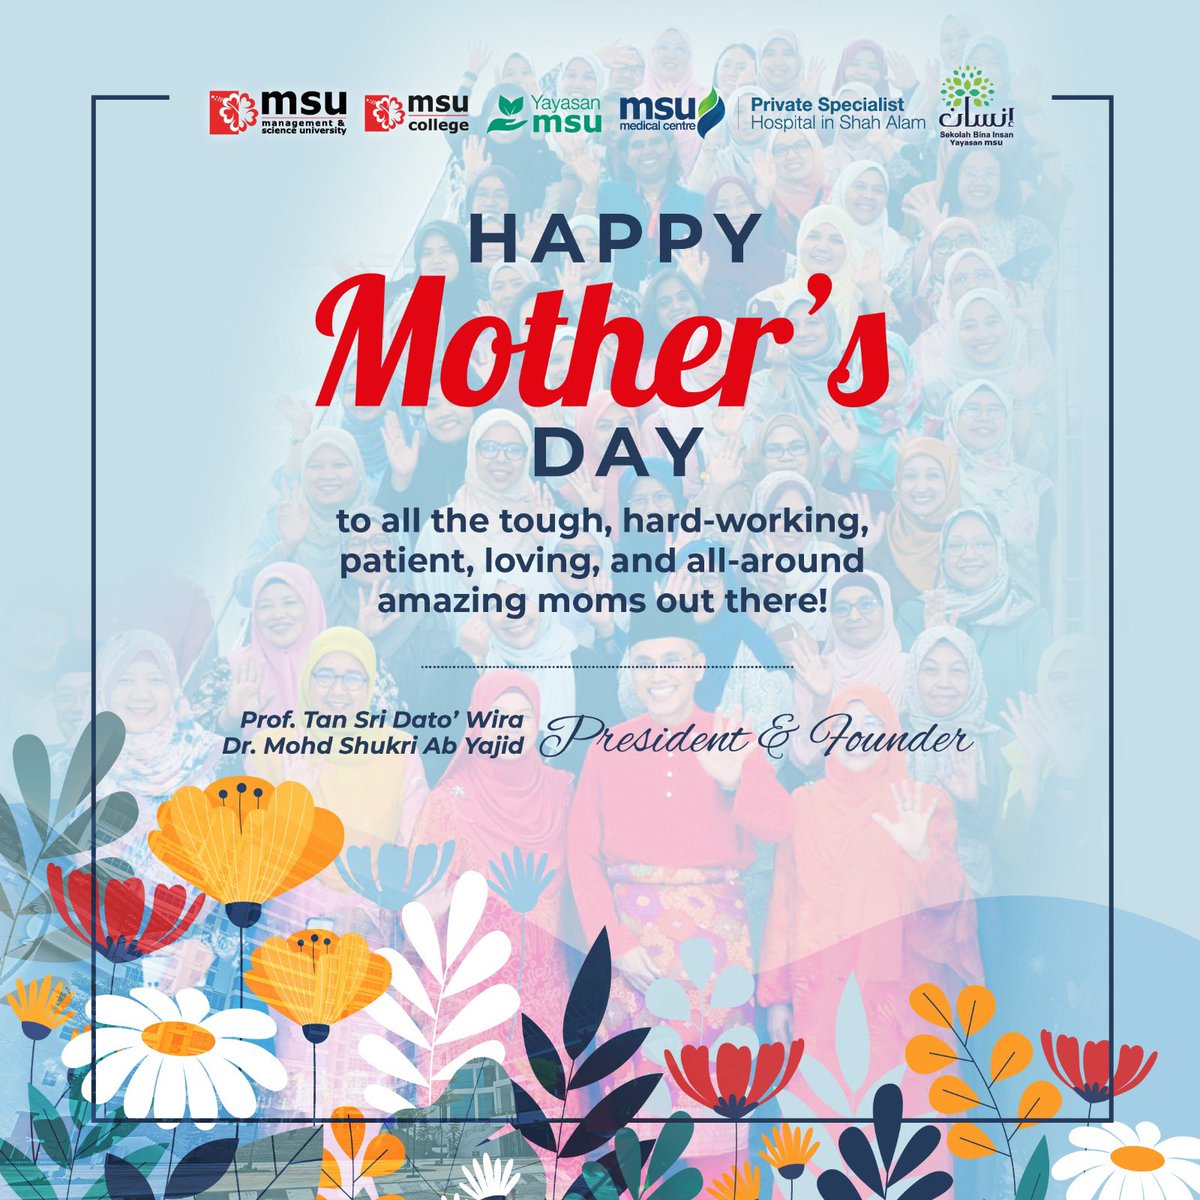 We are the finest versions of ourselves because of them. Let's honour their unwavering love, which has grown to be a source of support & pillars of strength for countless others. Wishing our amazing women, #HappyMothersDay! @MSUmalaysia @MSUcollege @msumcmalaysia @sbiyayasanmsu